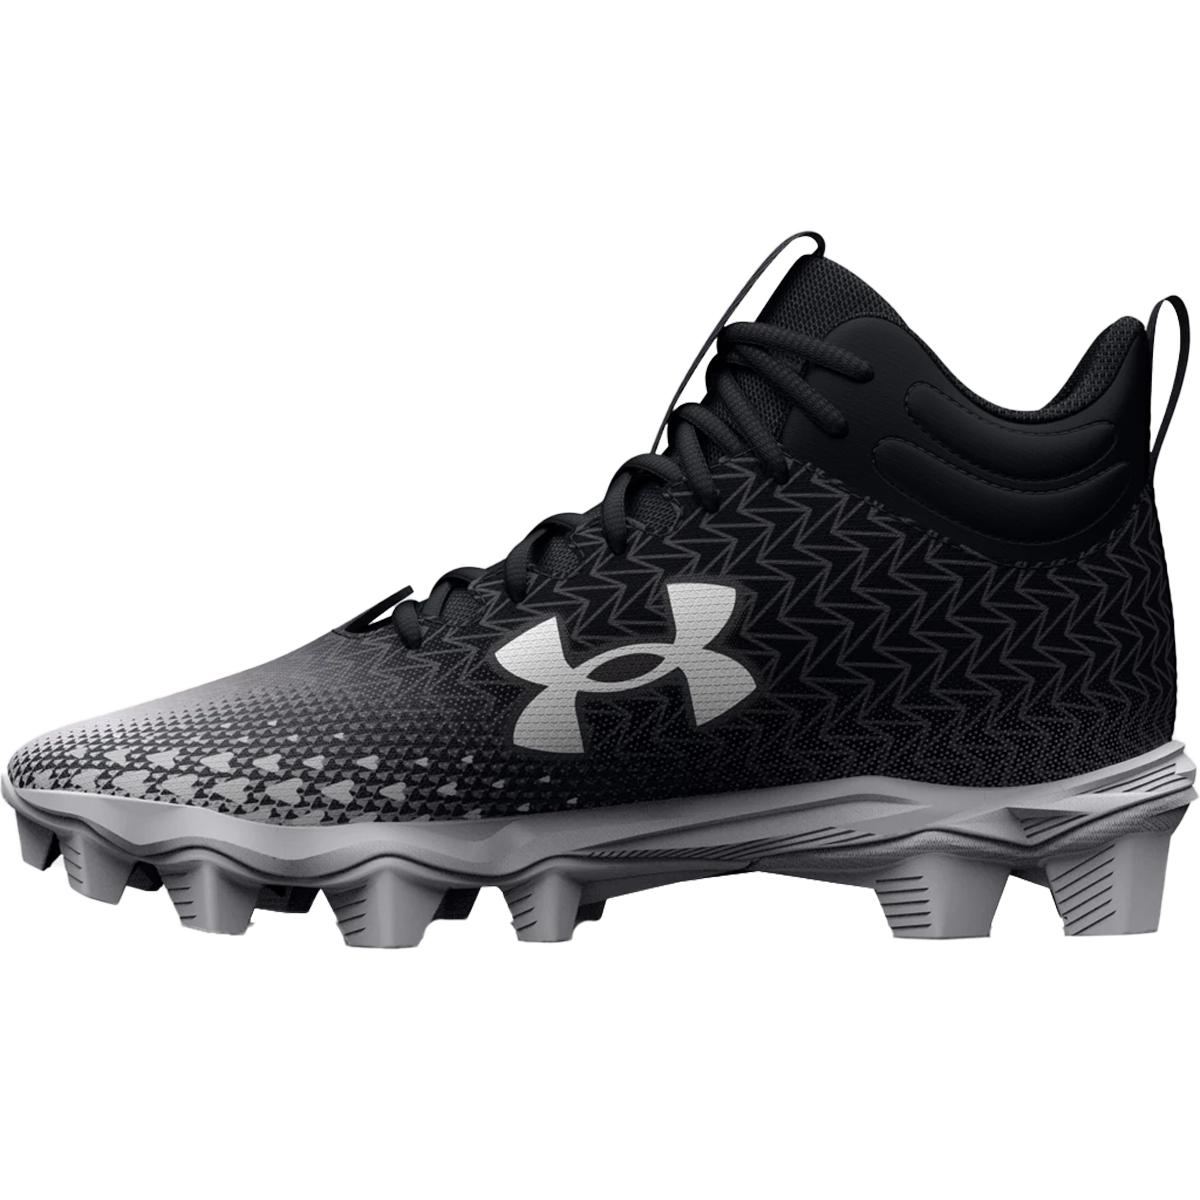 Youth Spotlight Franchise RM 3.0 Football Cleats alternate view